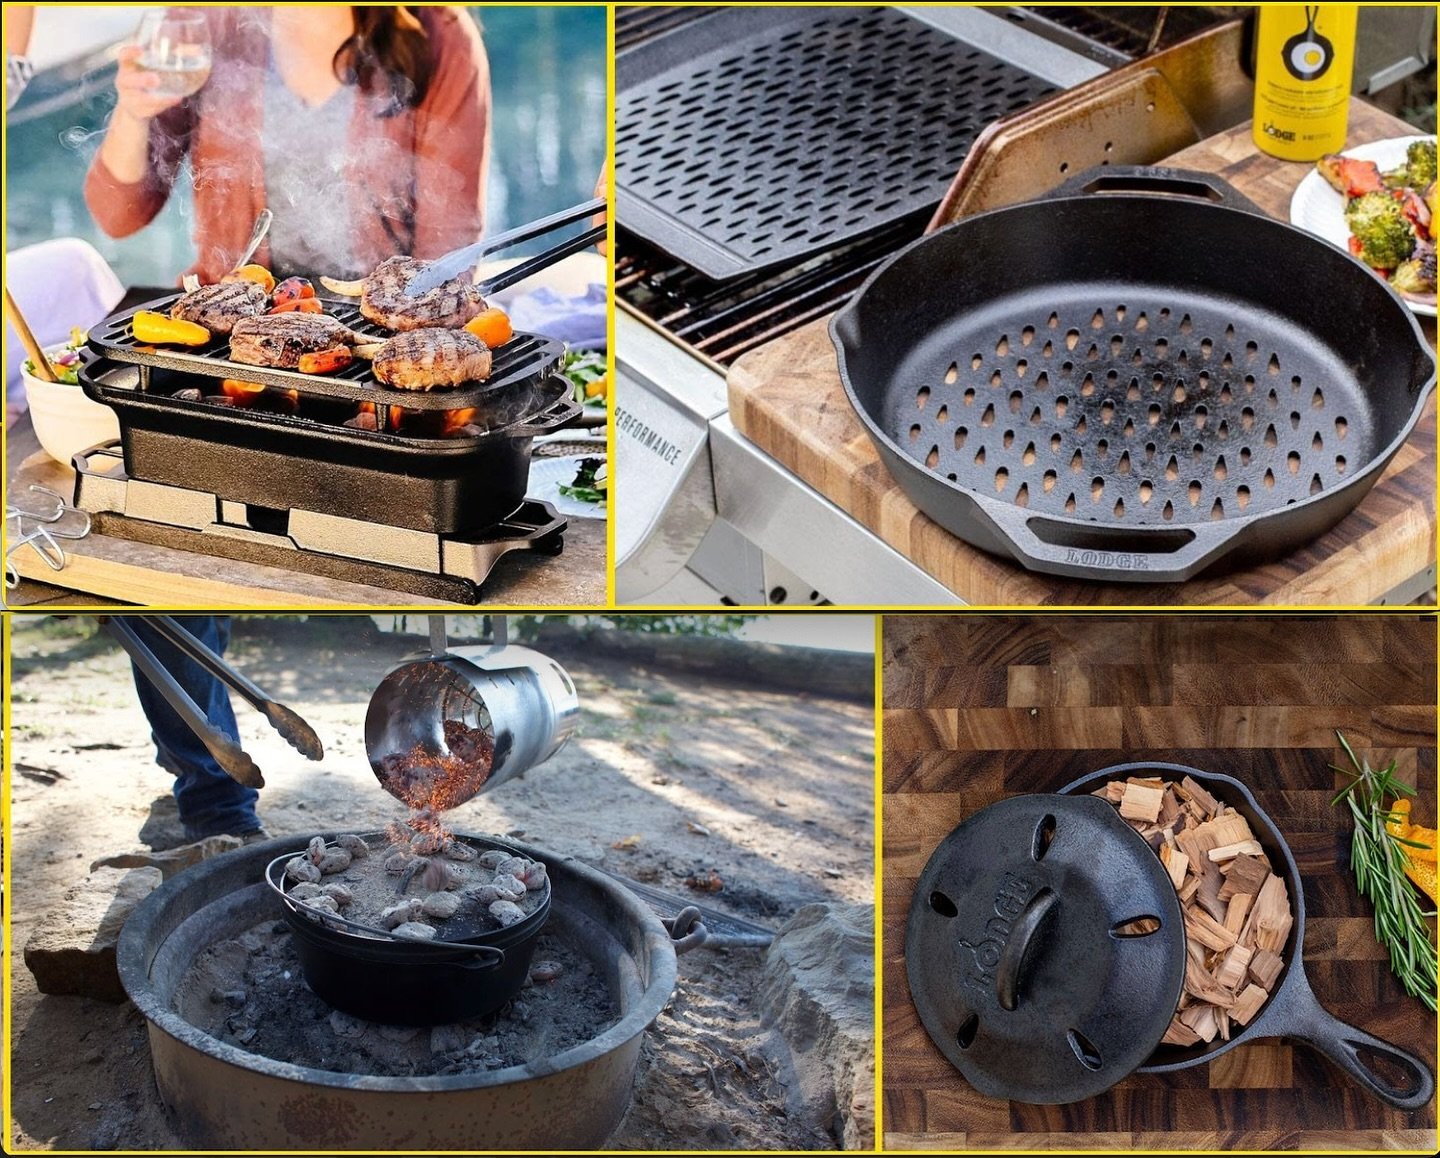 Do you guys love @lodgecastiron as much as I do? Well, first of all, I&rsquo;d say that quite a bit of love! If you do, here&rsquo;s a reason to love them even more - you can save up to 25% on select grilling pieces through May 24th. 

They&rsquo;ve 